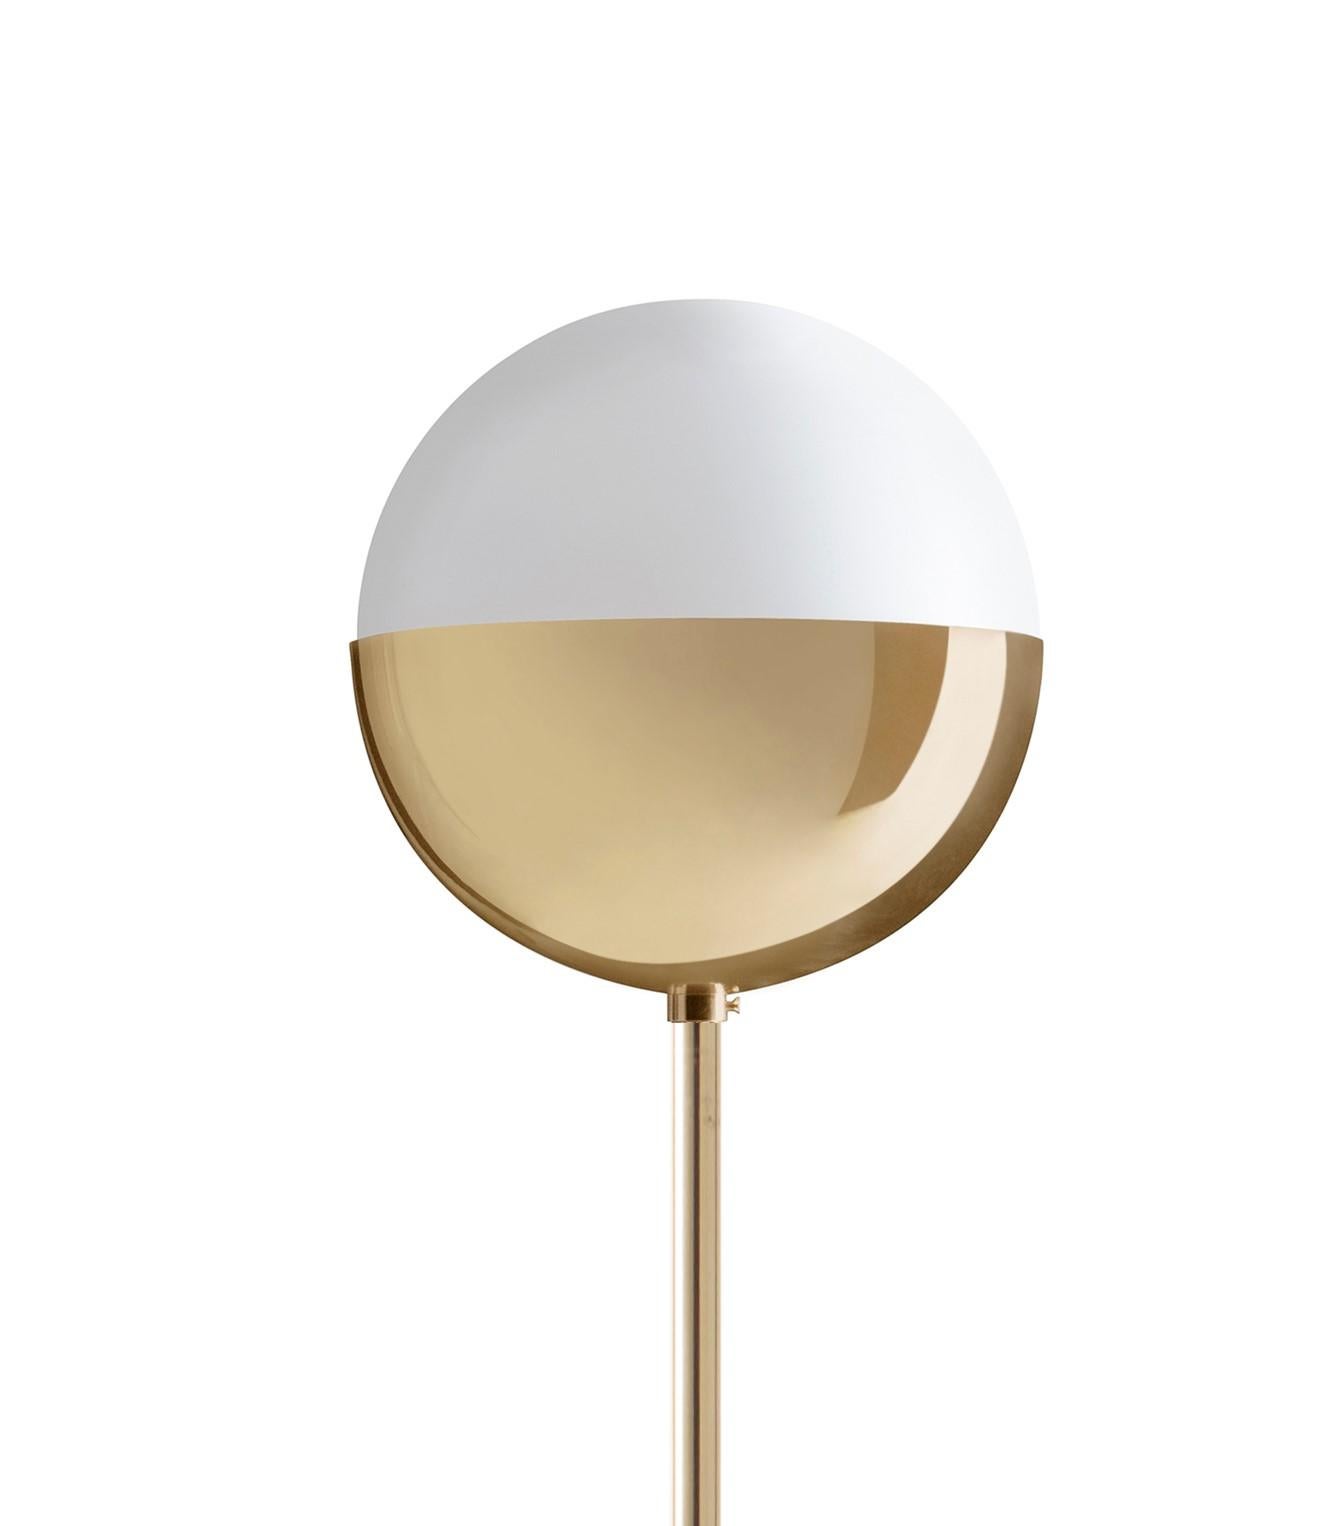 Brass floor lamp 01 dimmable 140 by Magic Circus Editions
Dimensions: D 25 x H 140 cm
Materials: Brass base, smooth brass tube, glossy mouth blown glass
Non-Dimmable version available.


Rethinking, reimagining, redesigning familiar objects